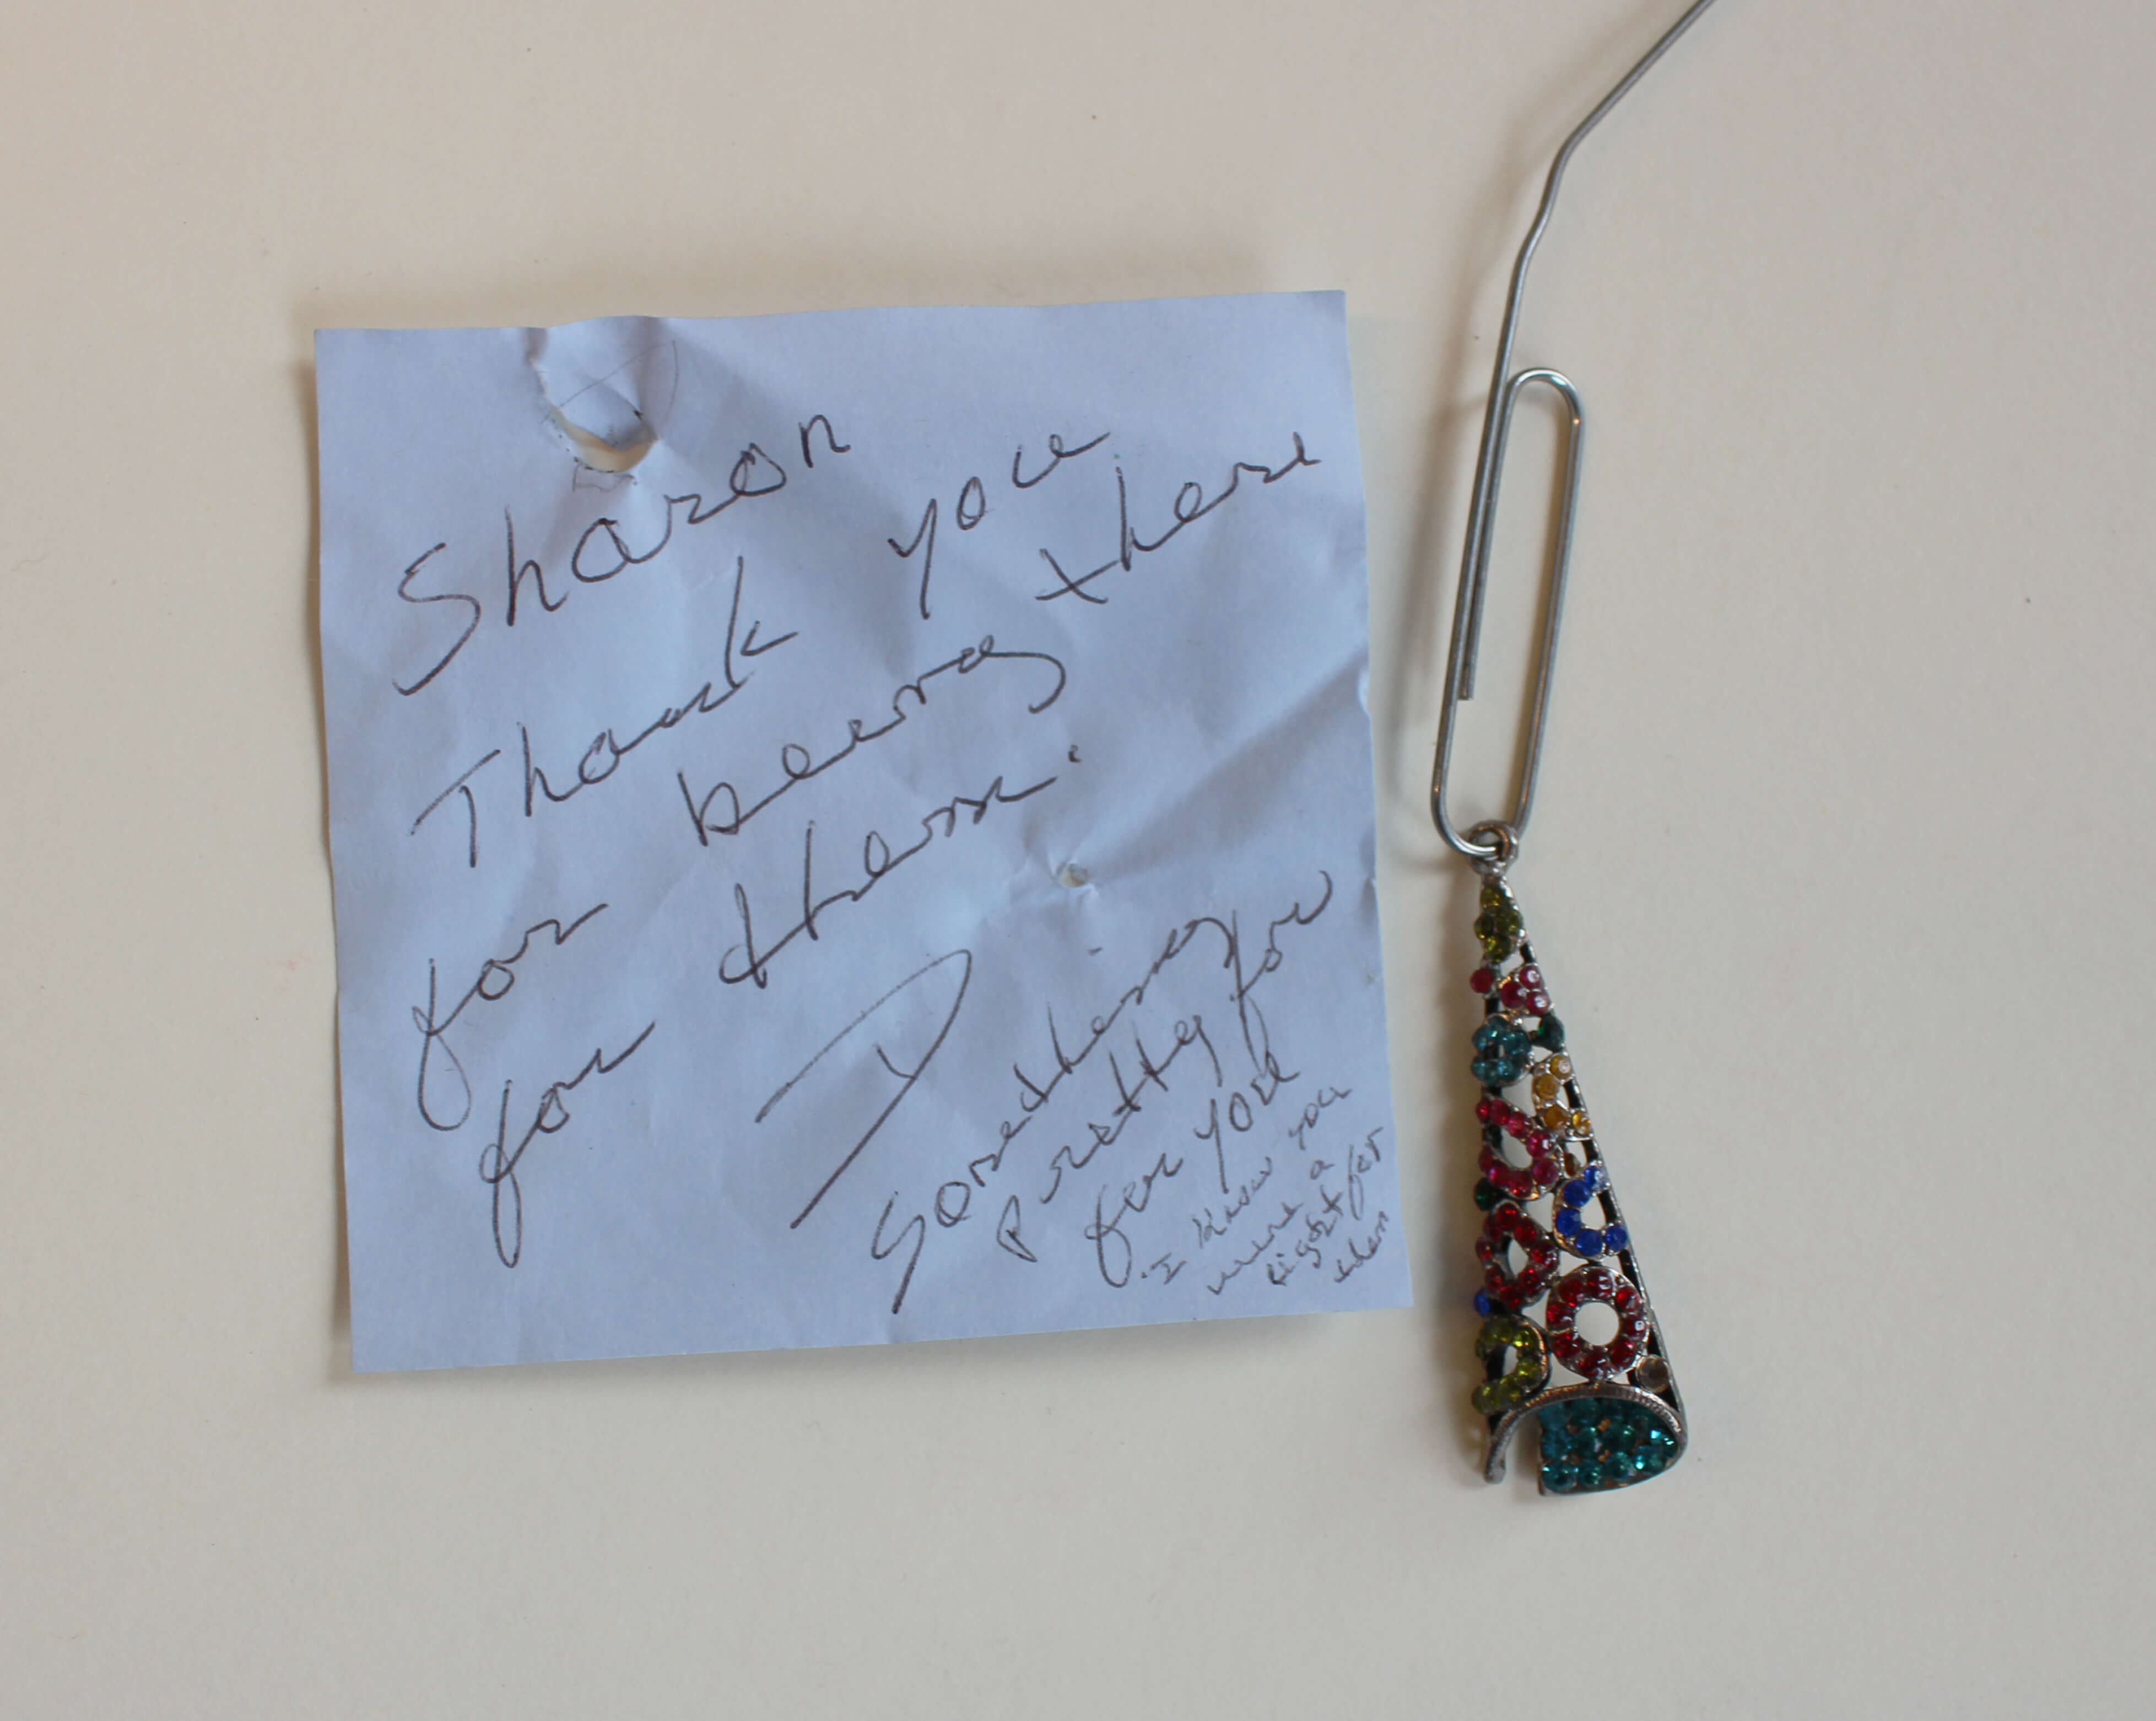 Jeweled charm and handwritten note.